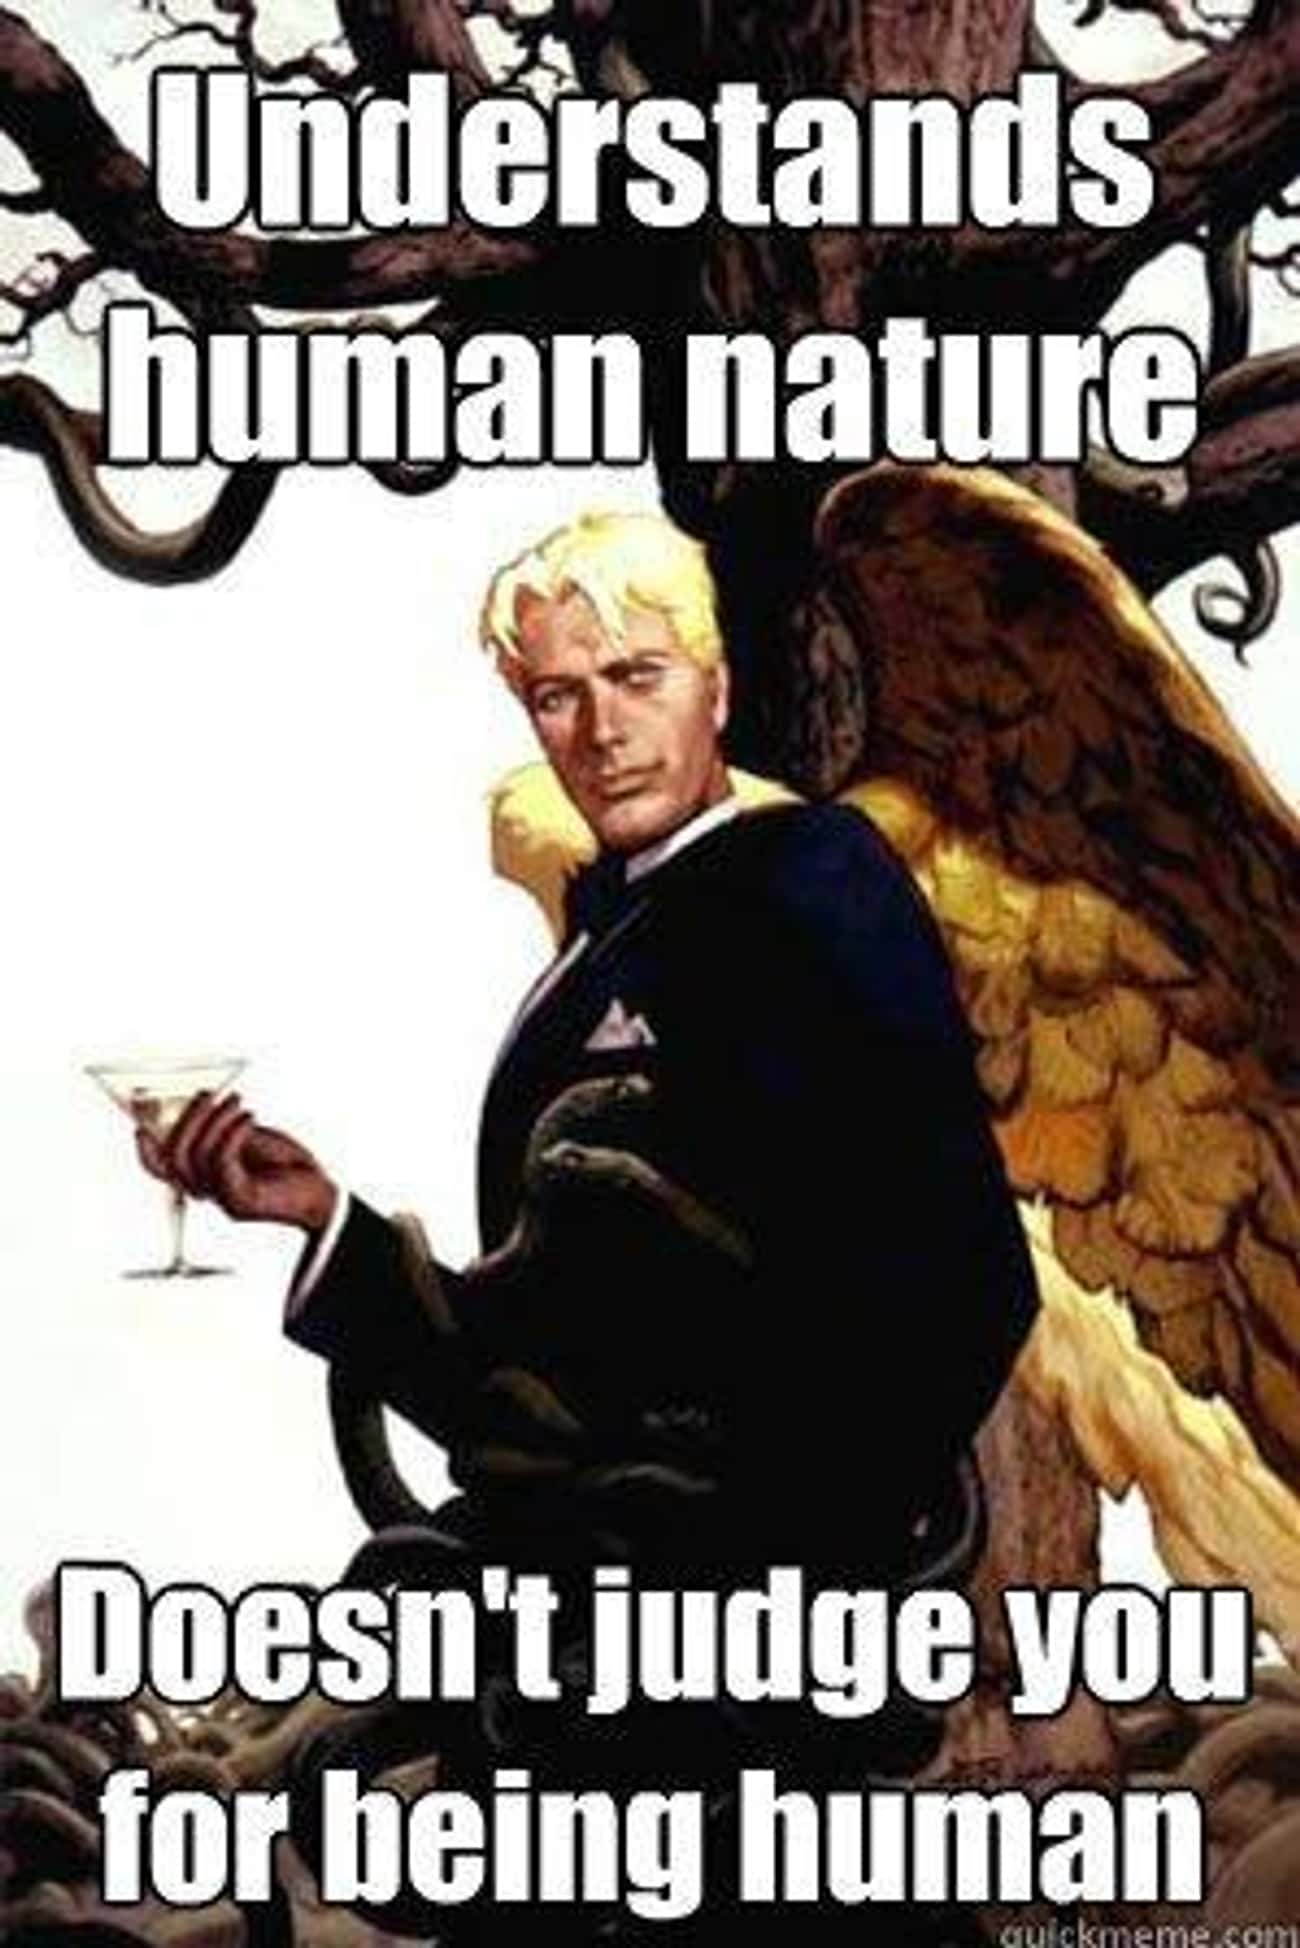 Good Guy Lucifer on Human Nature